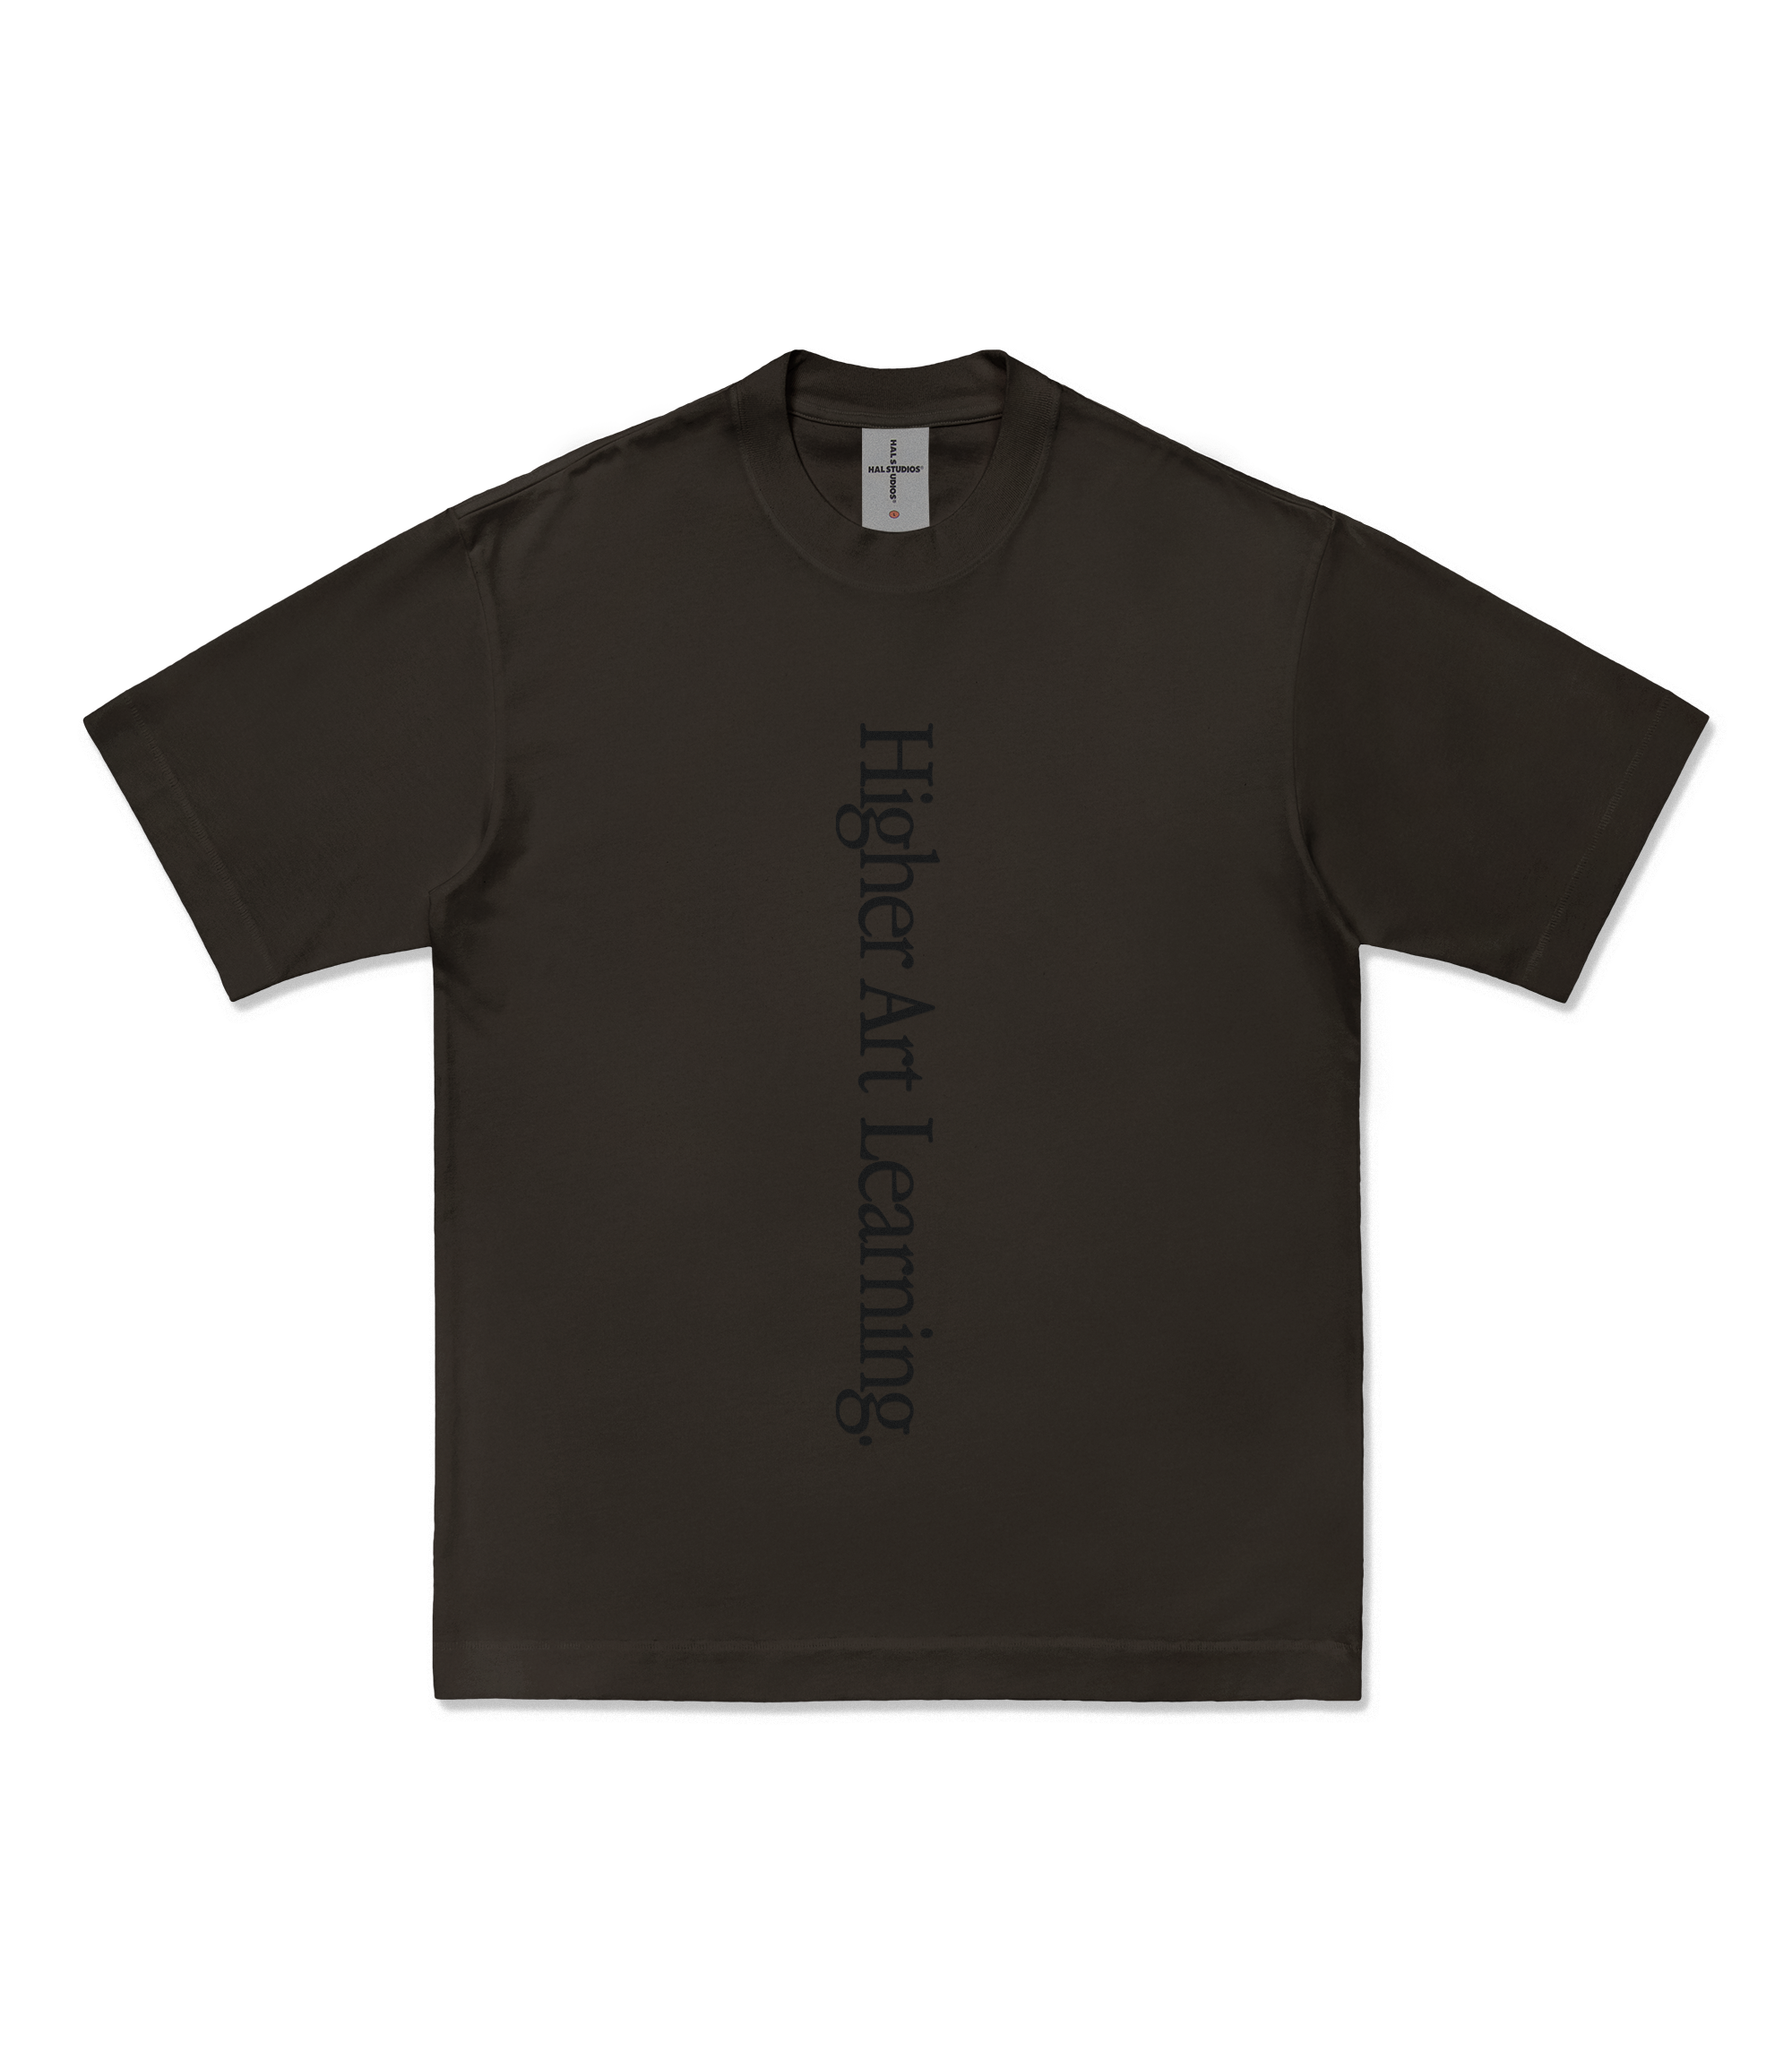 HIGHER ART LEARNING T-SHIRT - COFFEE